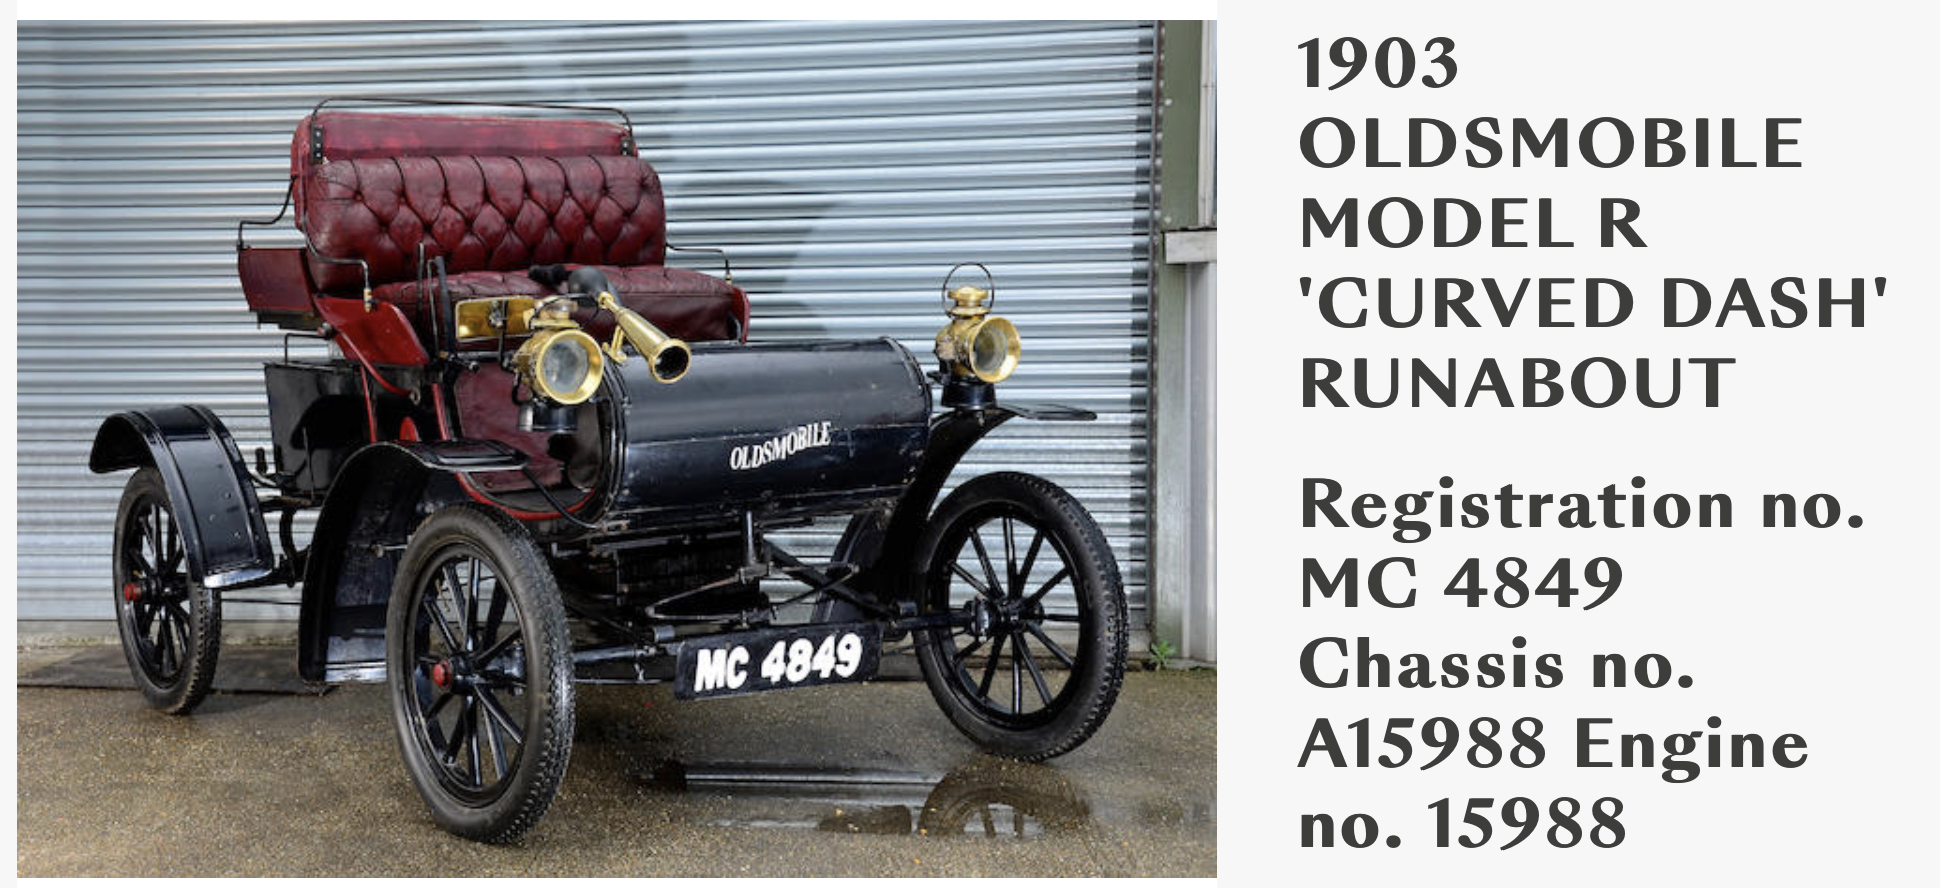 Bonhams  1903 Oldsmobile Model R Curved Dash Runabout Chassis no A15988 Engine no 15988